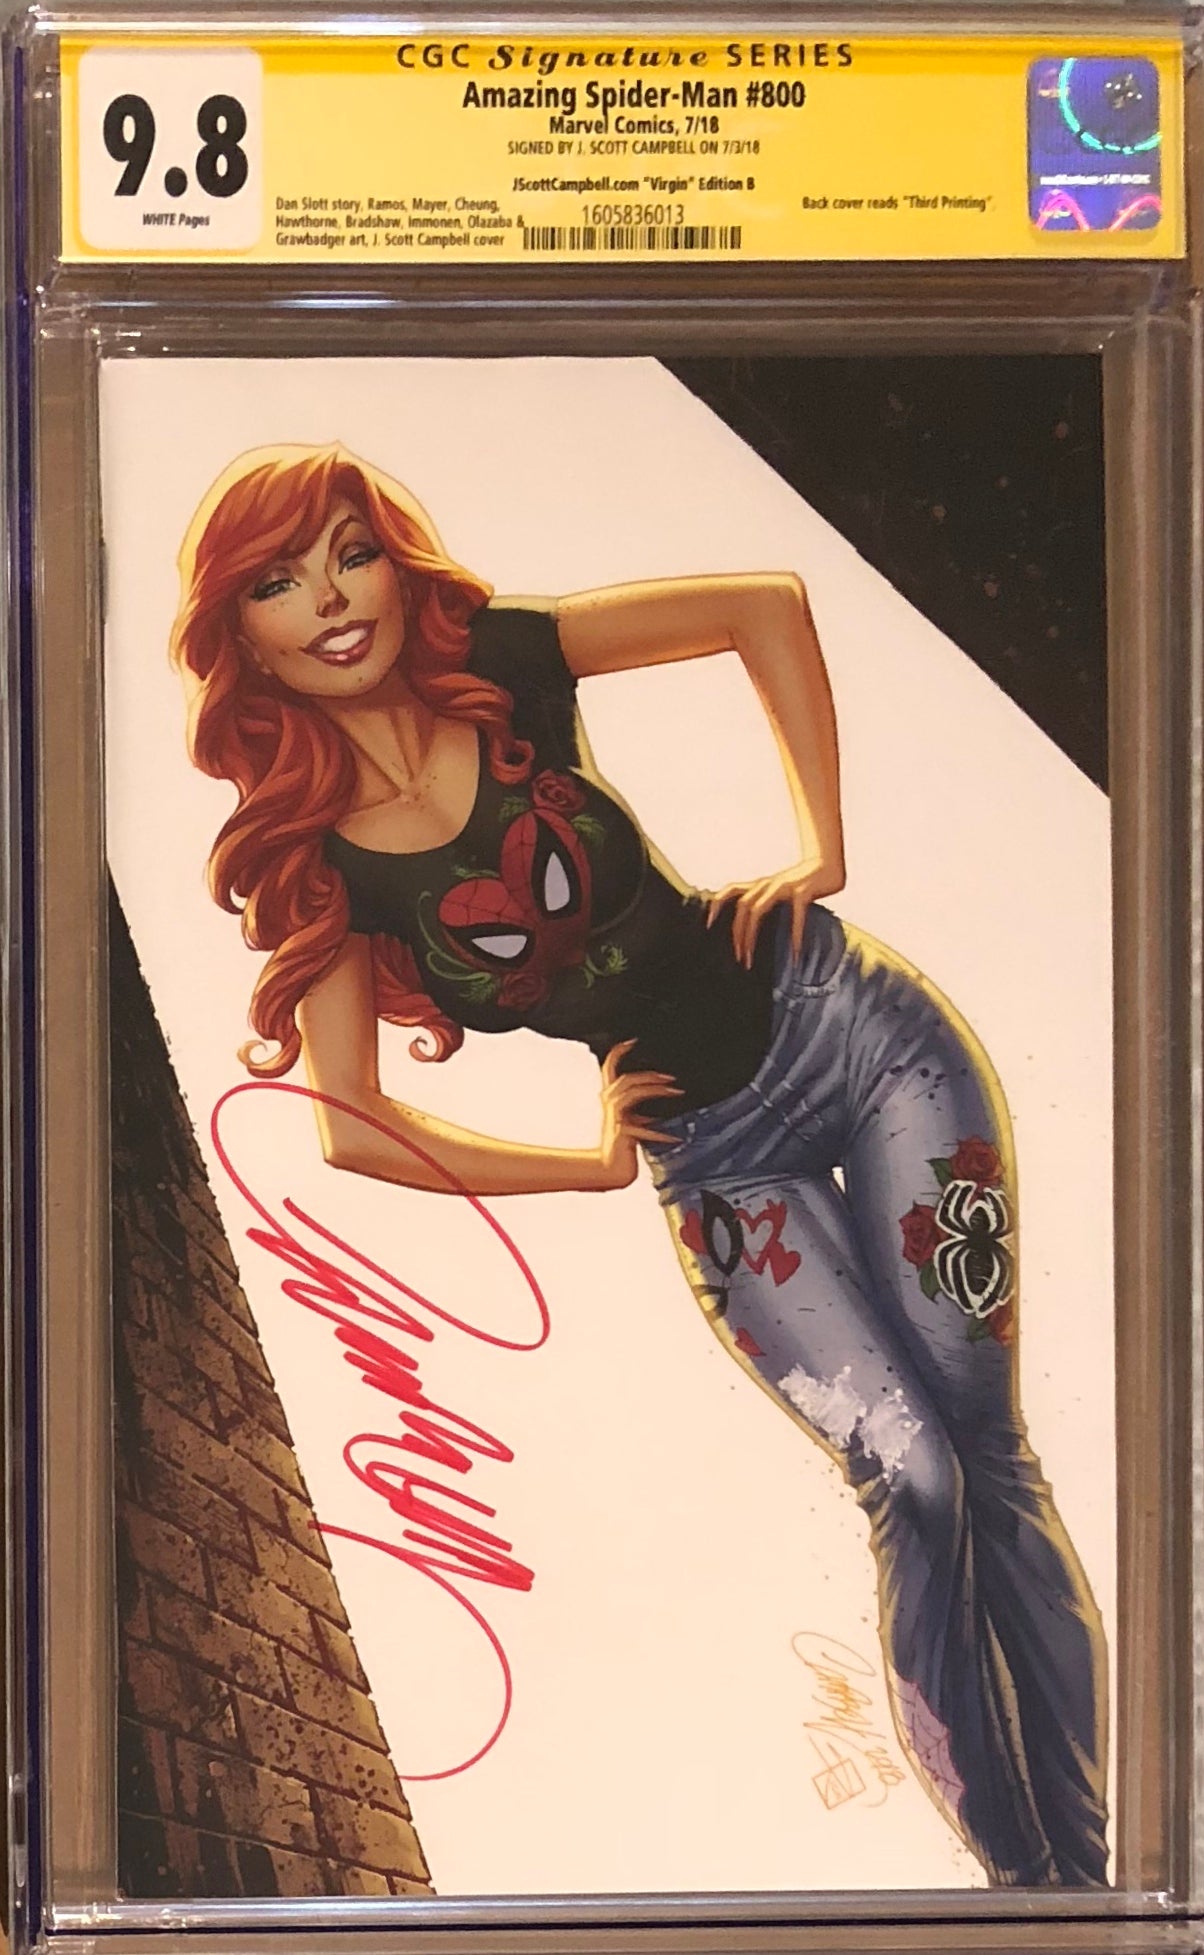 Amazing Spider-Man #800 J. Scott Campbell Edition B "Mary Jane" SDCC Virgin Exclusive CGC 9.8 SS